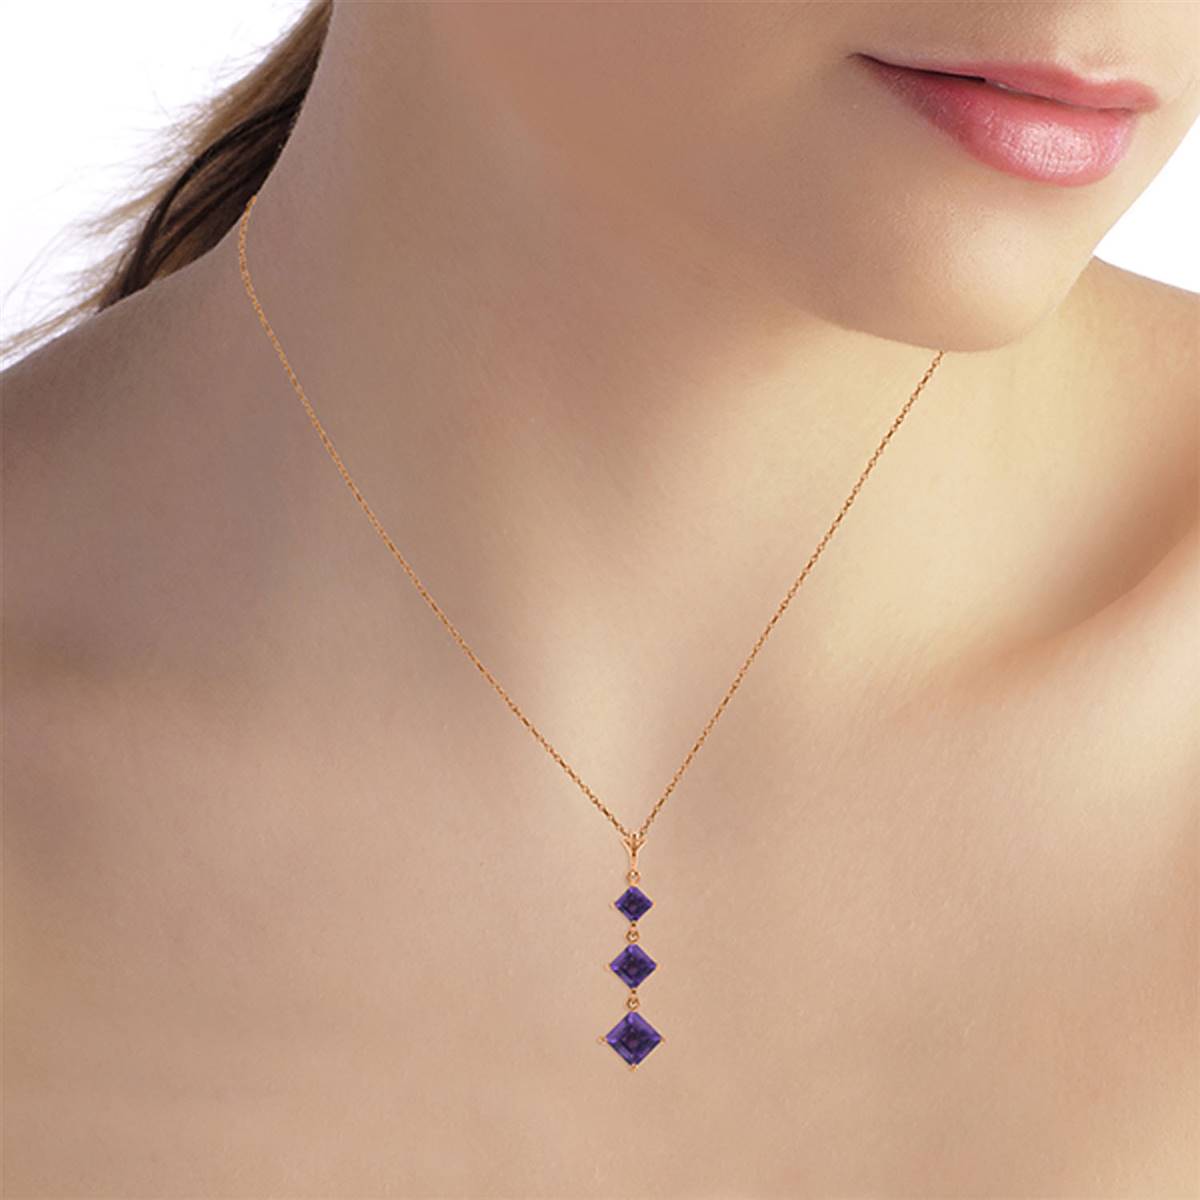 2.4 Carat 14K Solid Rose Gold Waterdrops Amethyst Necklace